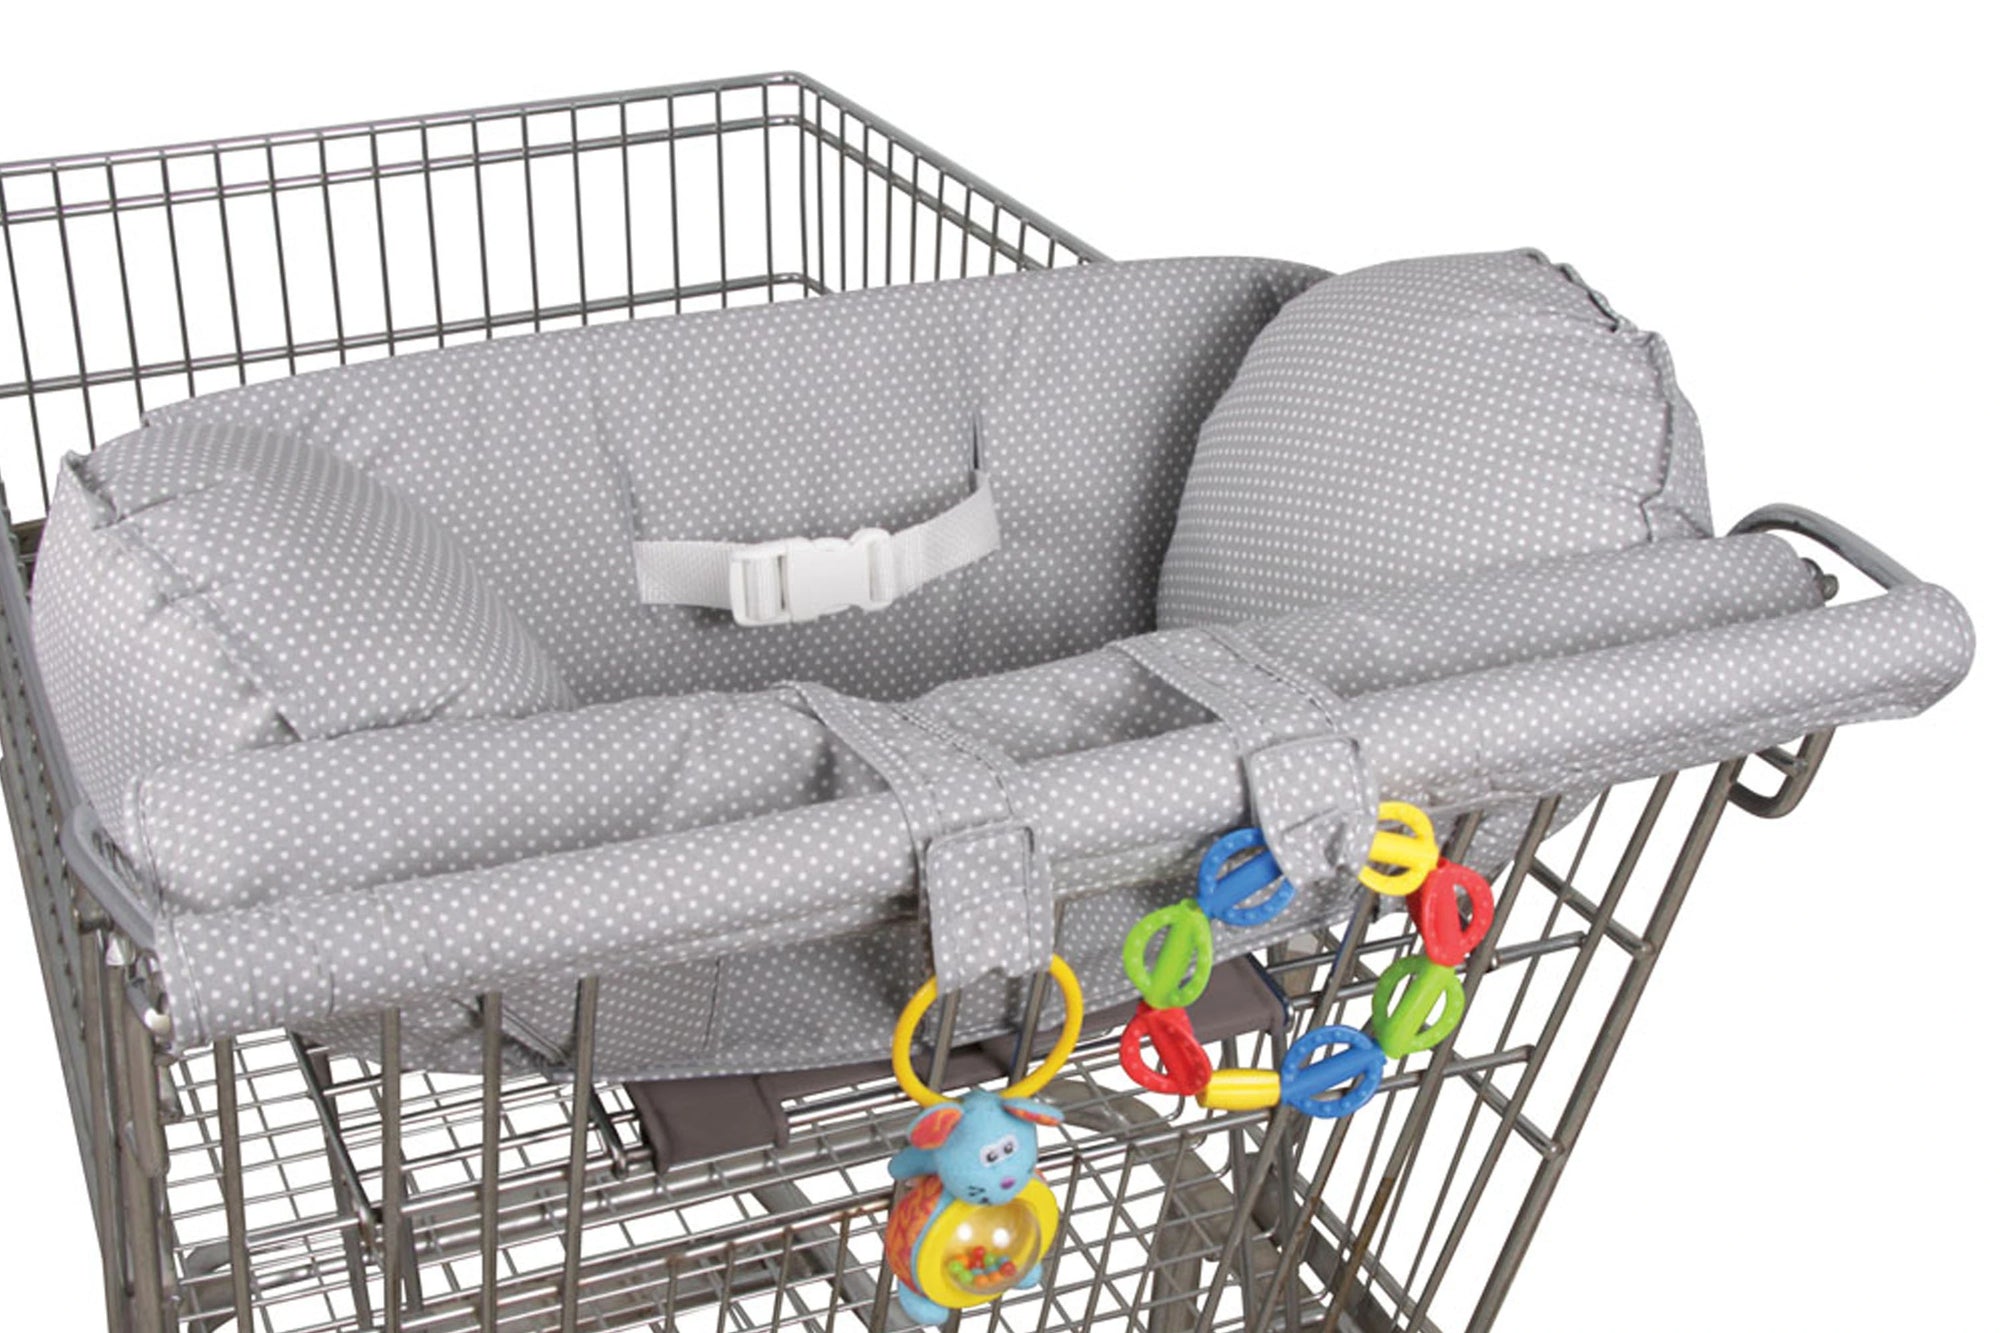 Prop R Shopper with child in cart in Gray Pin Dot